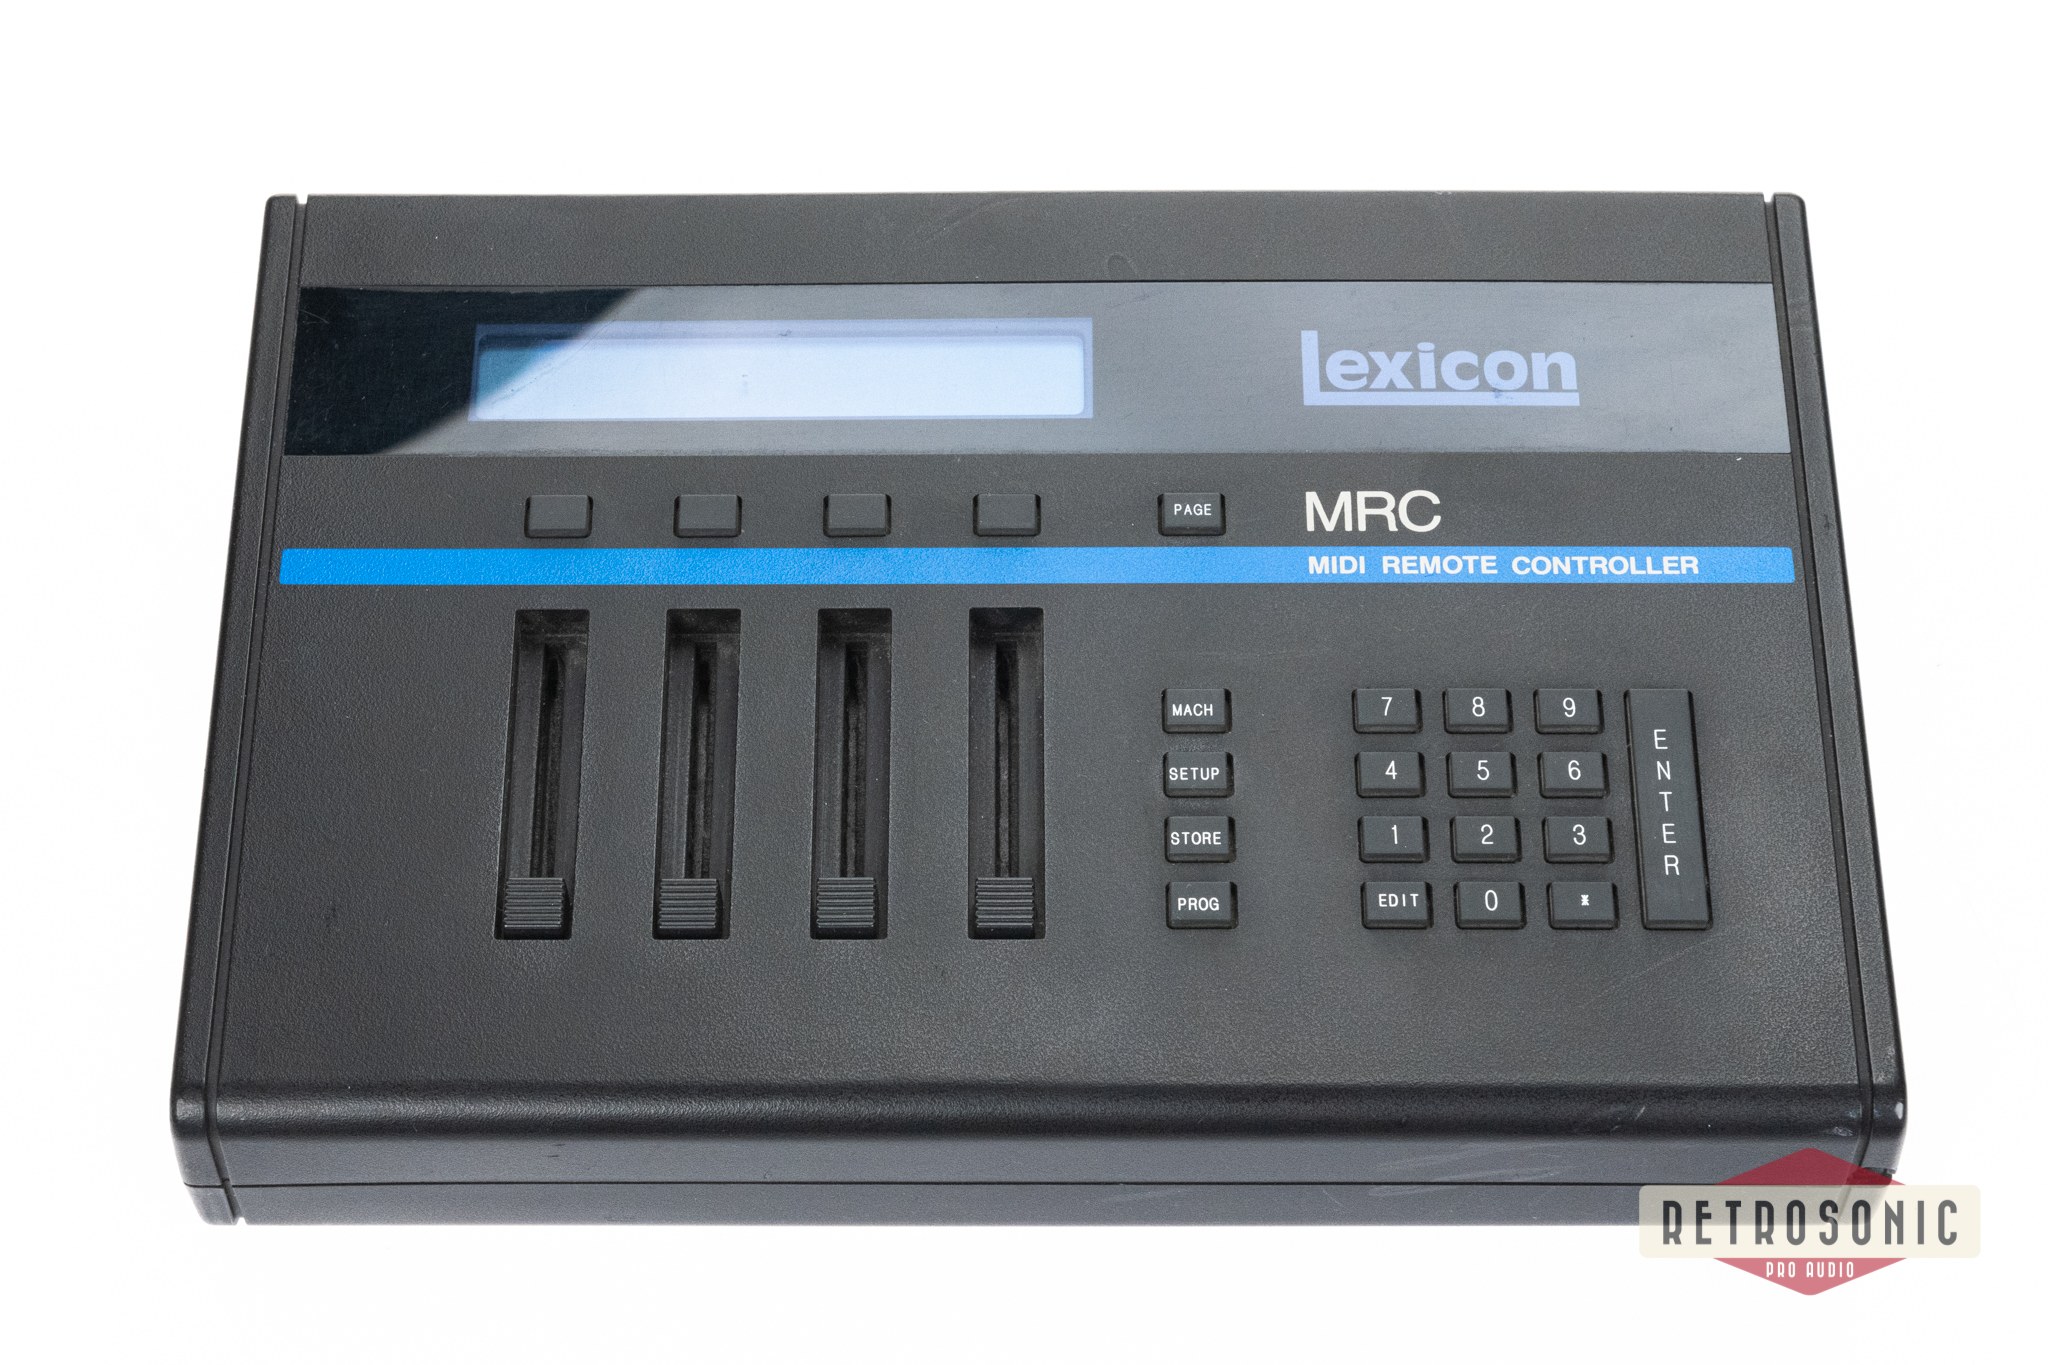 Lexicon LXP-1 set of two with MRC Midi Remote Controller